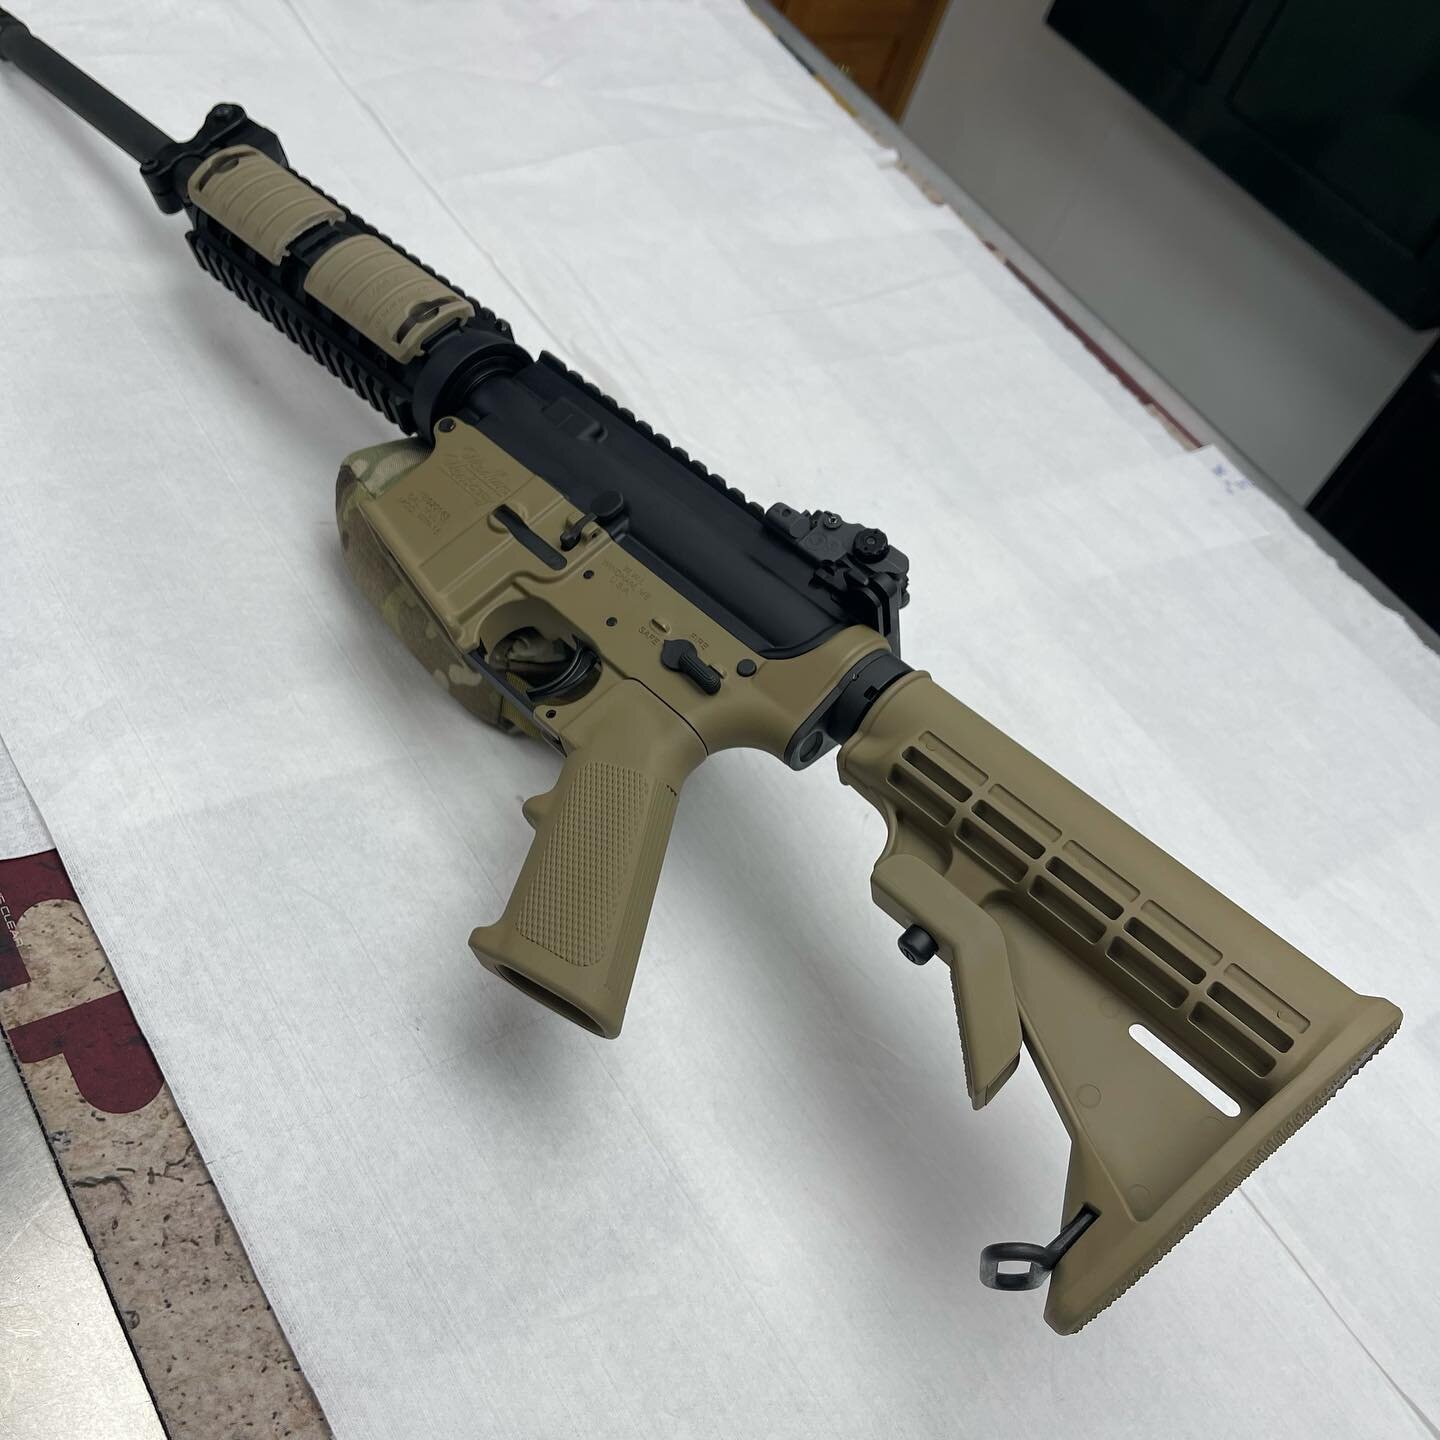 A little Coyote Tan for a customer that has been patient for a couple months, thanks. 
.
.
#coyotetan #cerakote #windhamweaponry #cerakotecertified #doitright #beaboutit #marylandcerakote